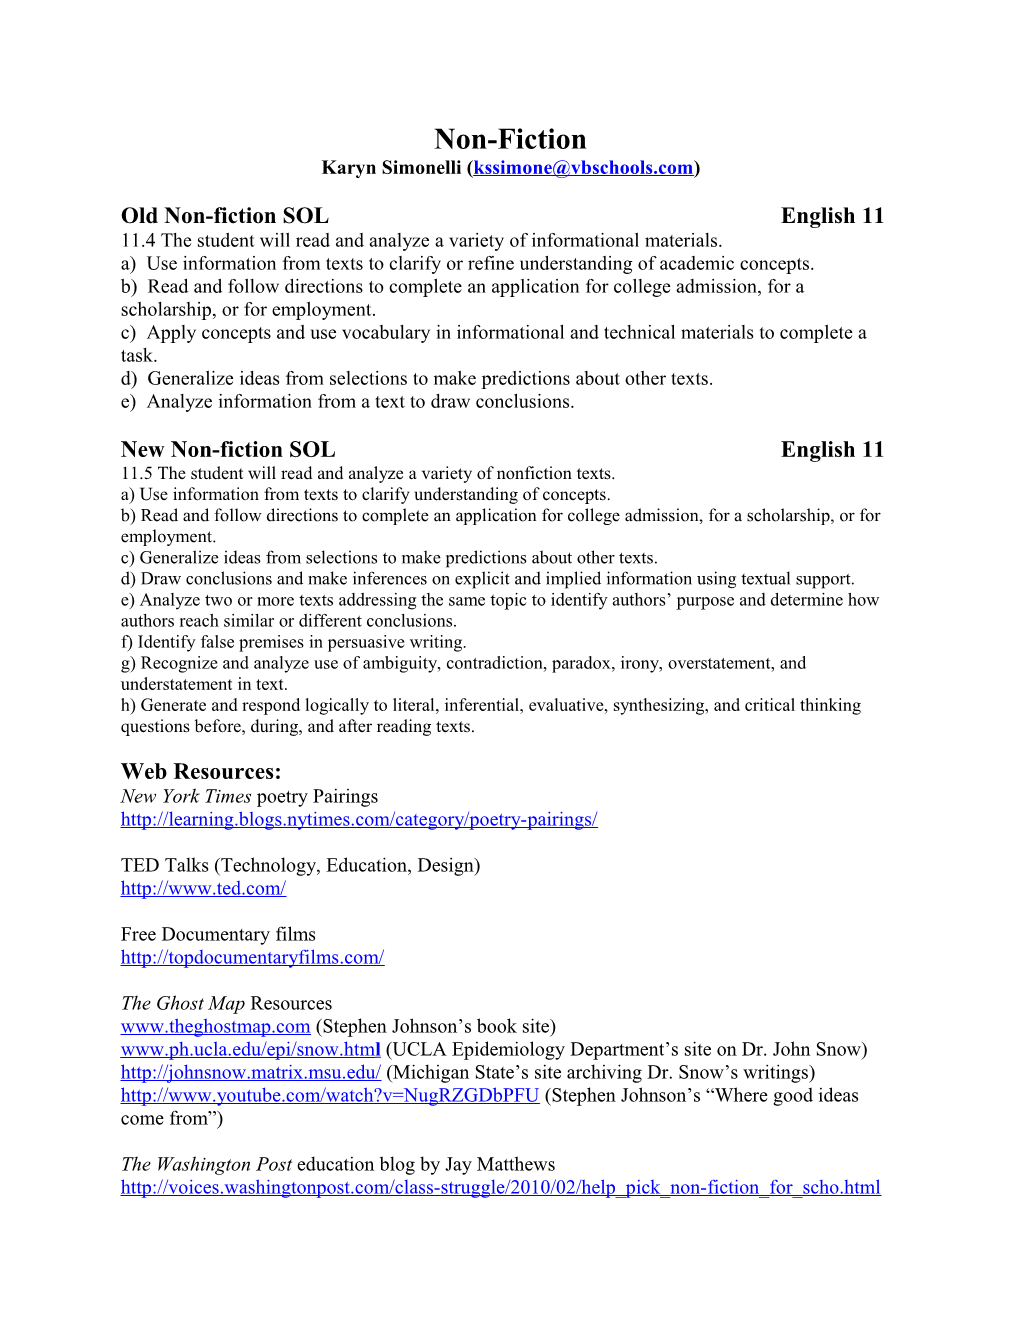 Old Non-Fiction Solenglish 11